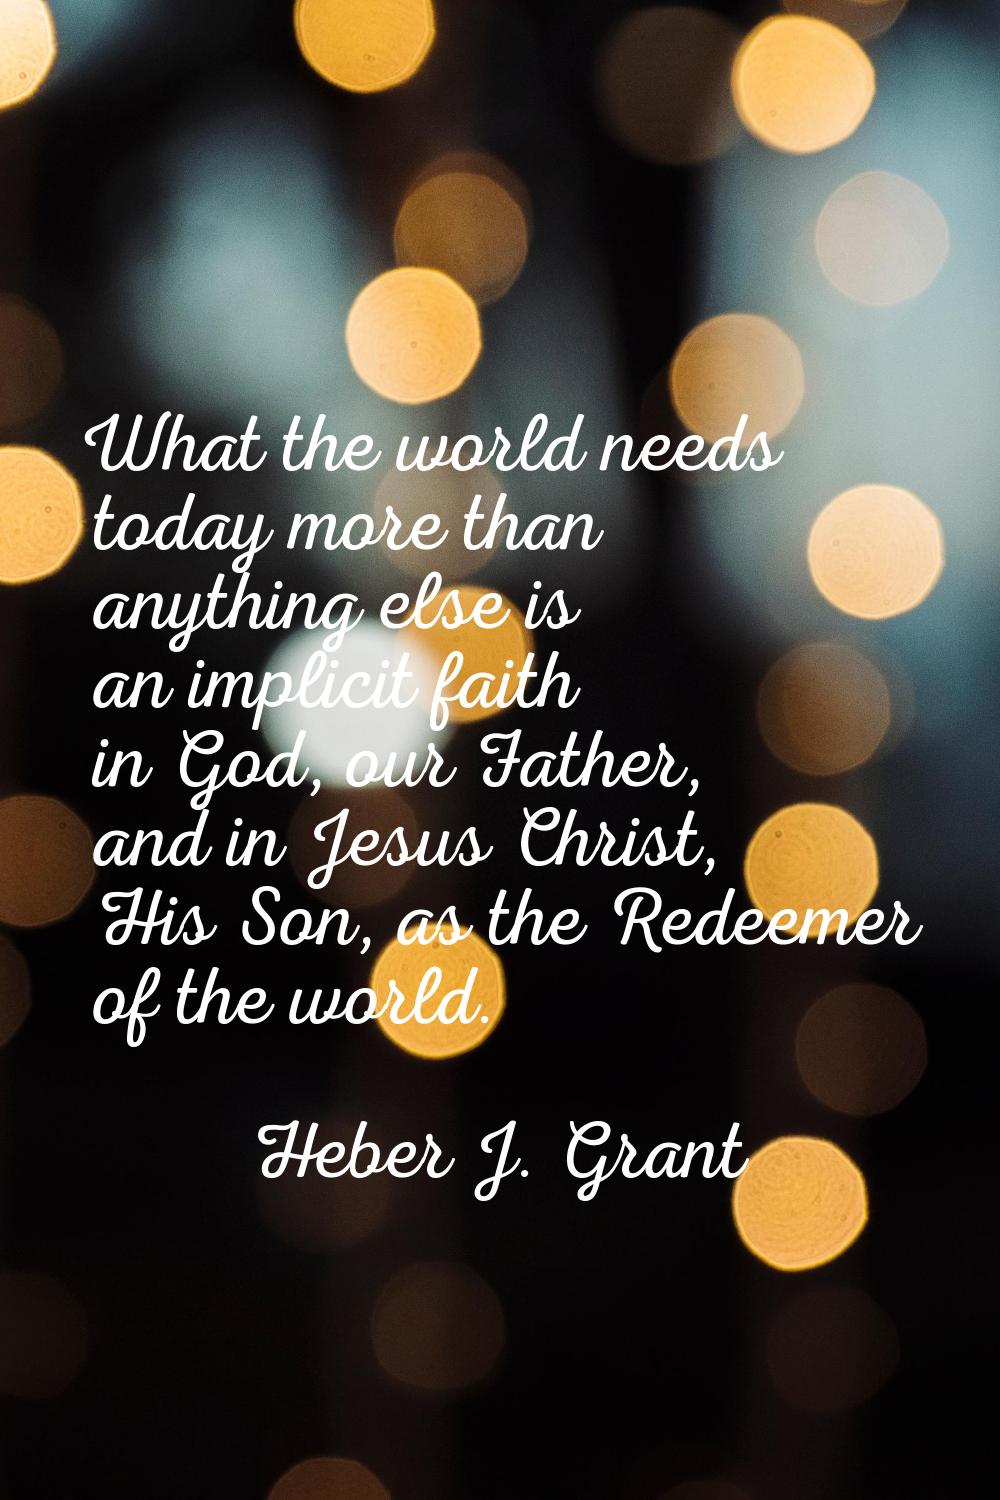 What the world needs today more than anything else is an implicit faith in God, our Father, and in 